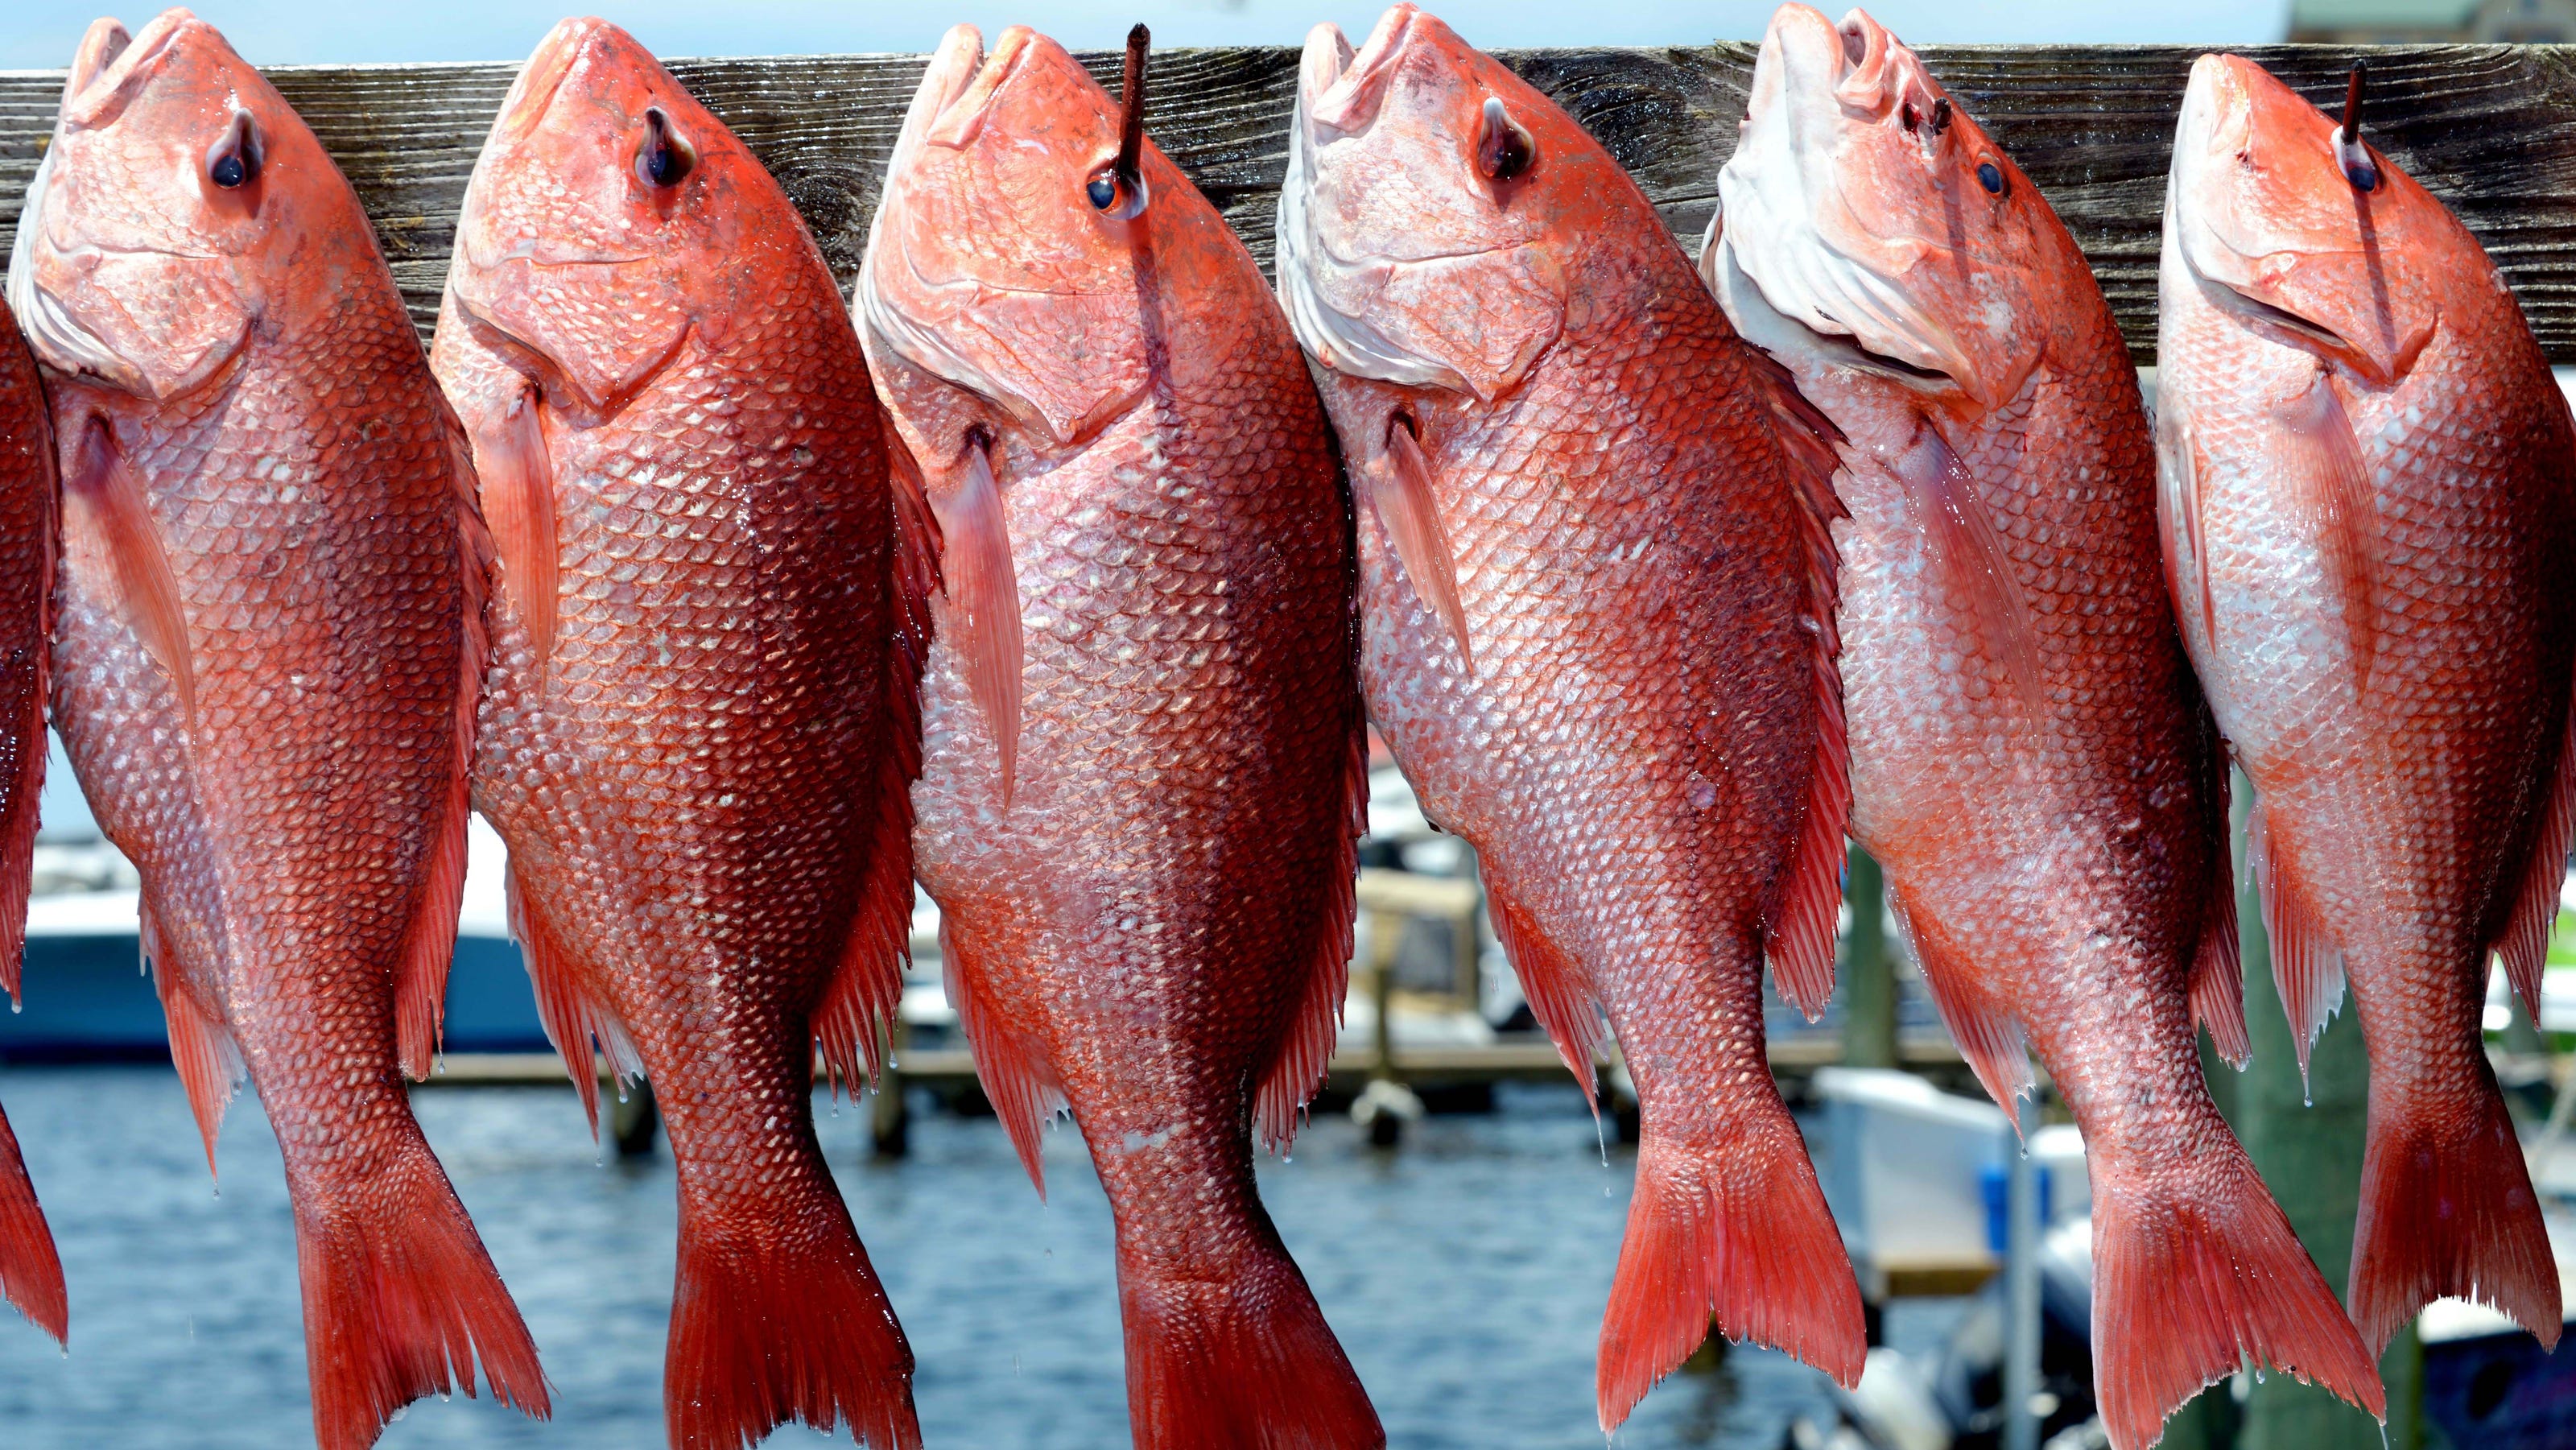 Area anglers are having success catching red snapper